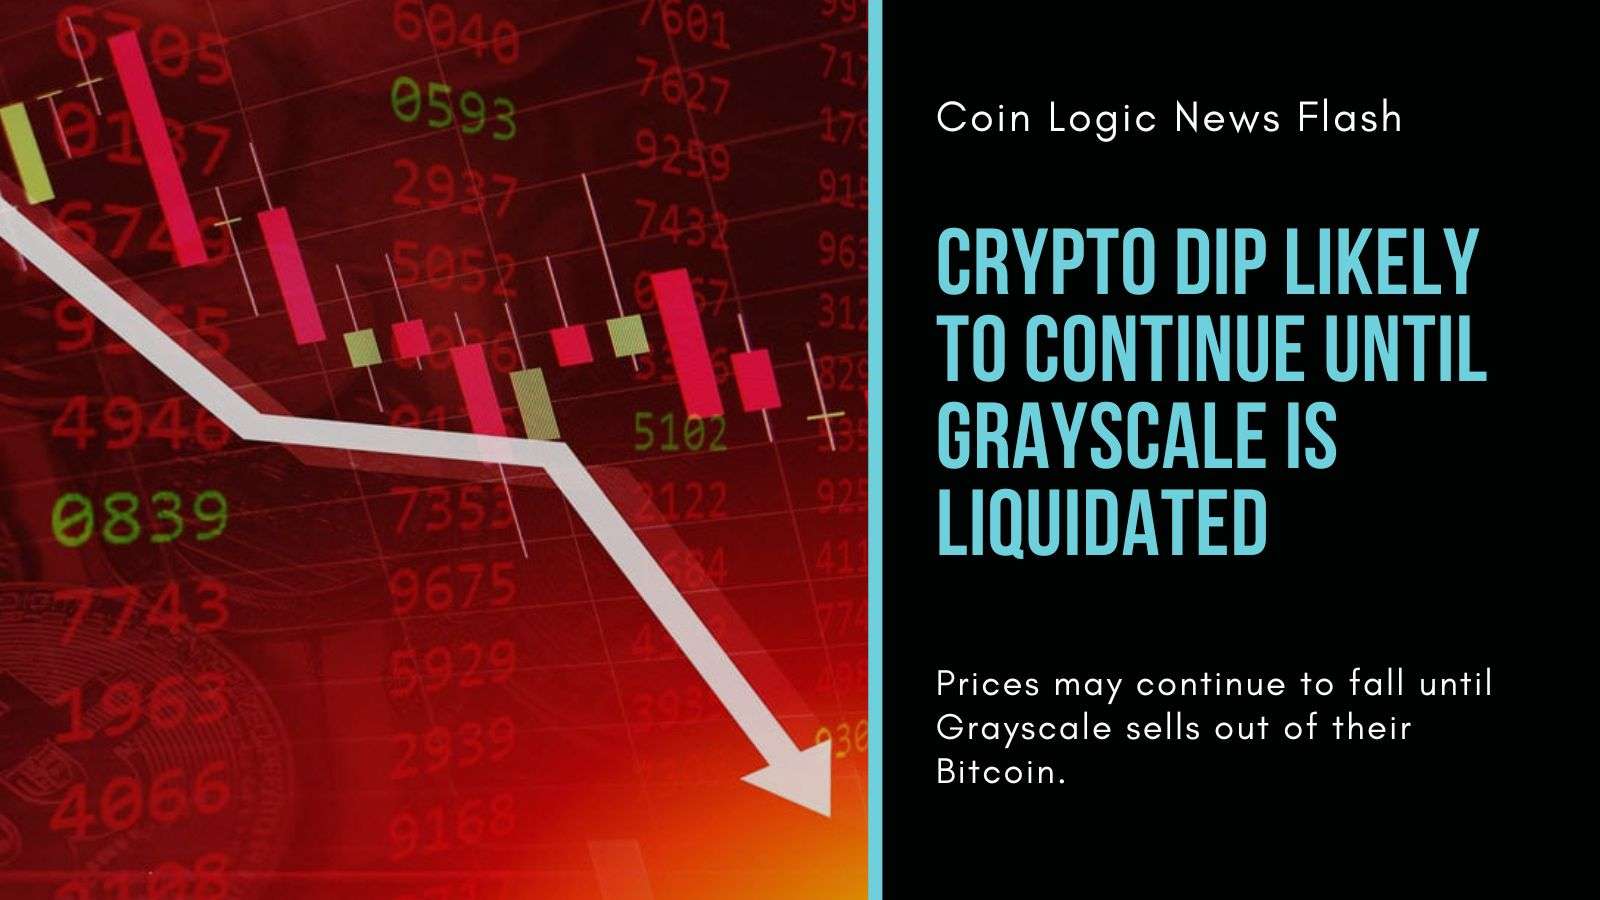 crypto dip likely to continue